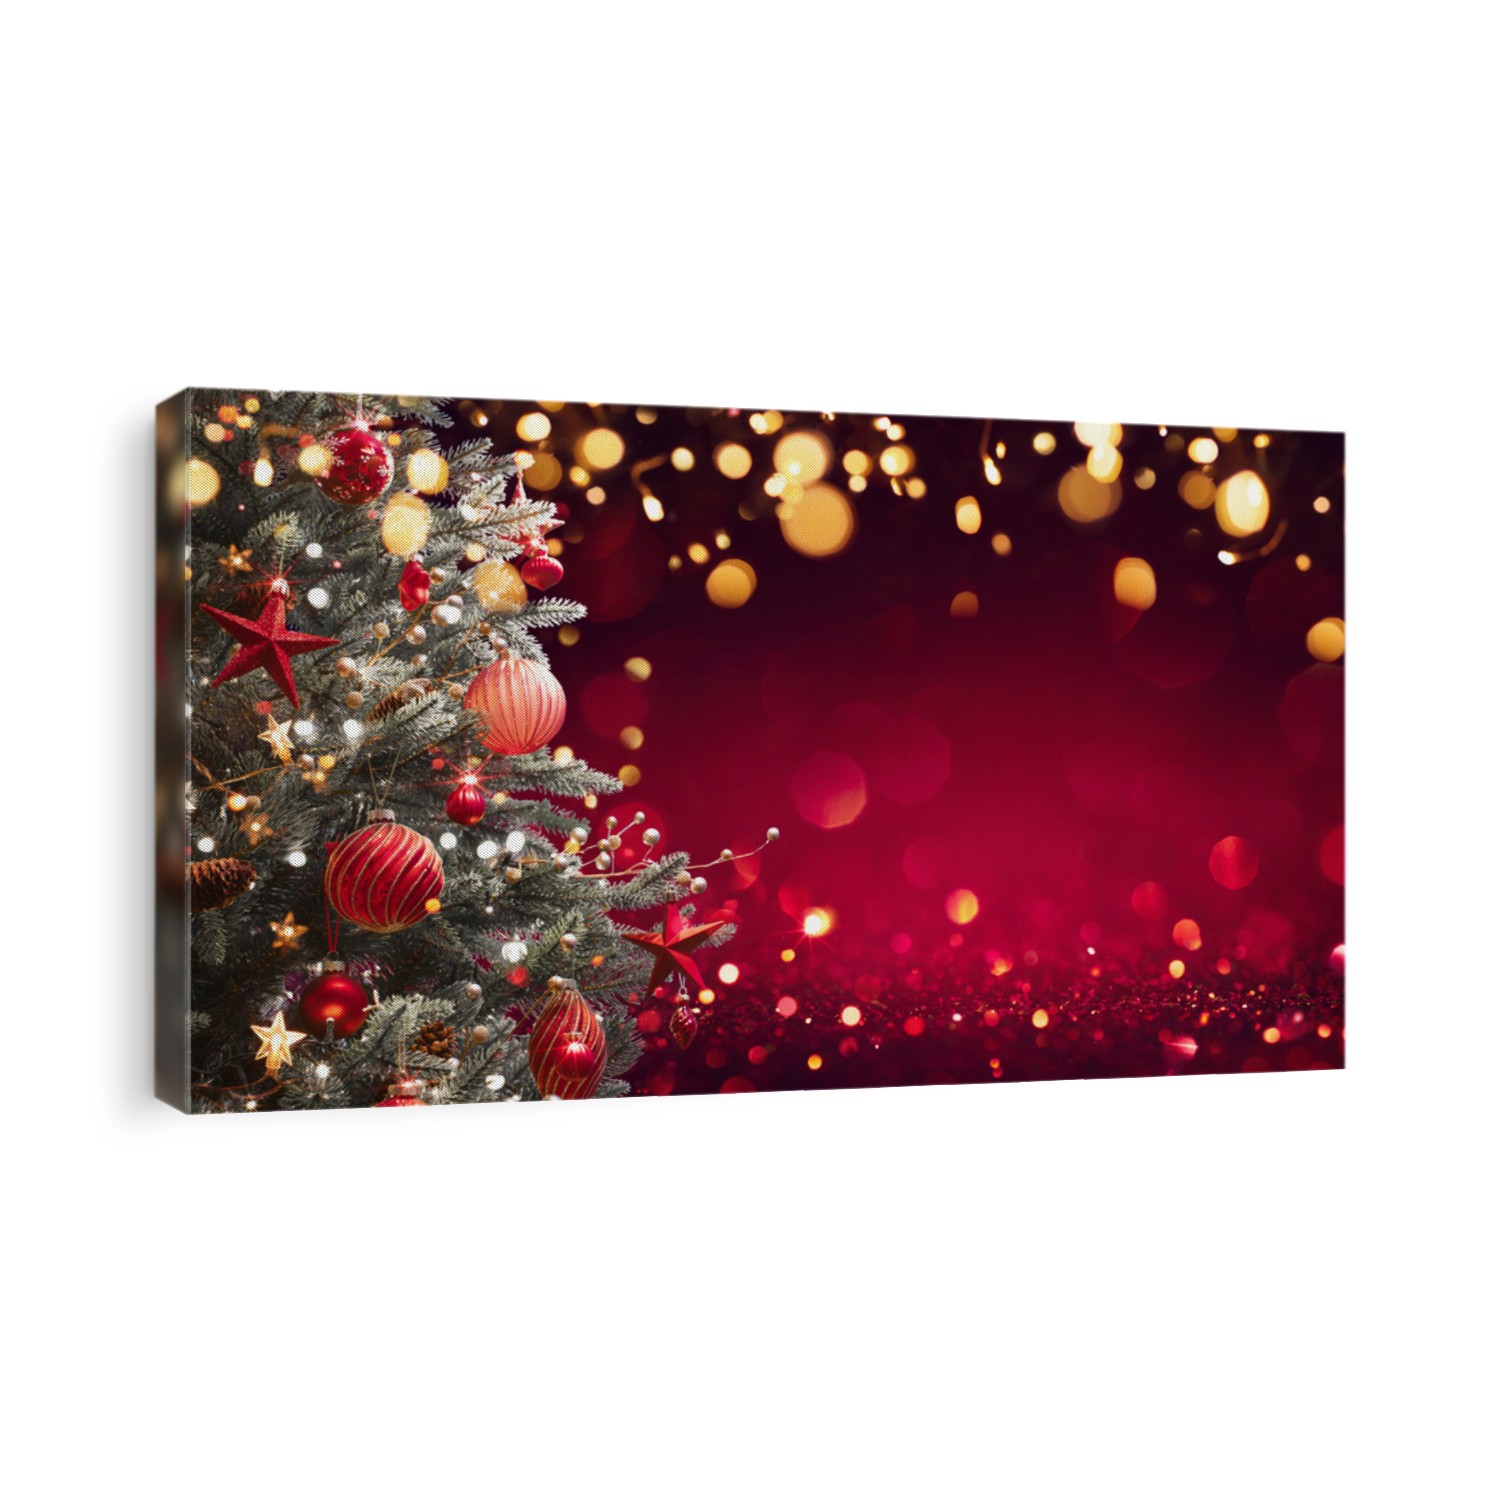 Christmas Tree With Decorations And Glitter. Winter Holiday Background